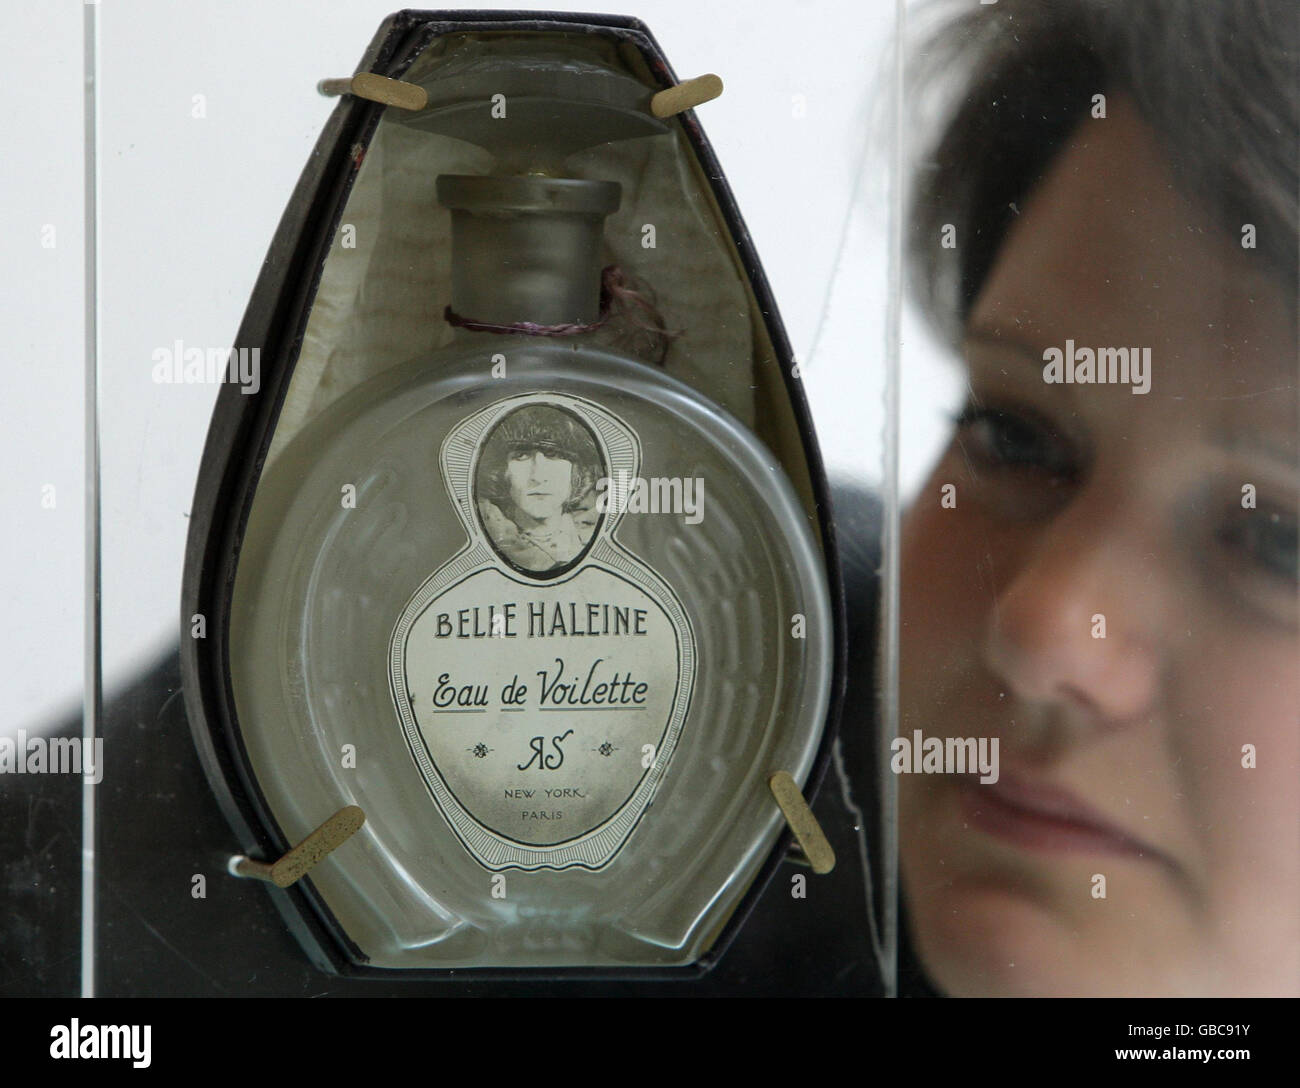 A member of staff at Christies auction house, London with 'Belle haleine - Eau de voilette' by Marcel Duchamp, valued at 1,000,000 to 1,500,000 Euros, as part of the exhibition of items from the collection of Yves Saint Laurent and Pierre Berge. Stock Photo